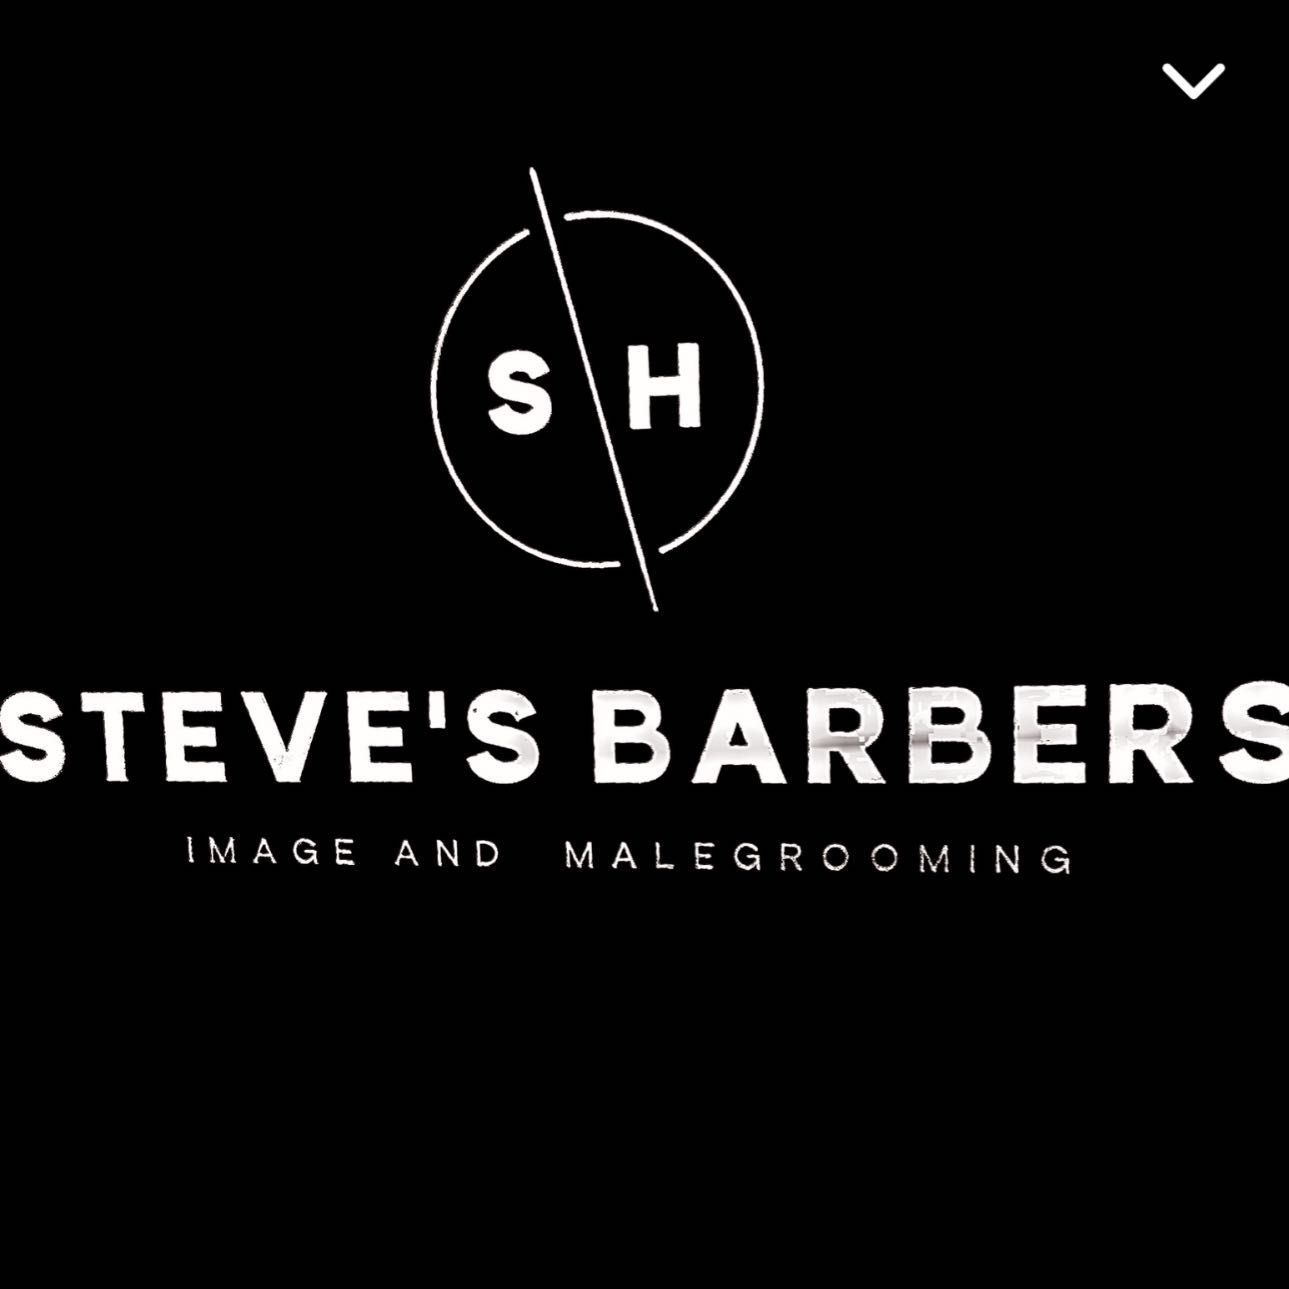 Steves Barbers Image and Malegrooming, Springfield Centre, Unit 3, Limerick